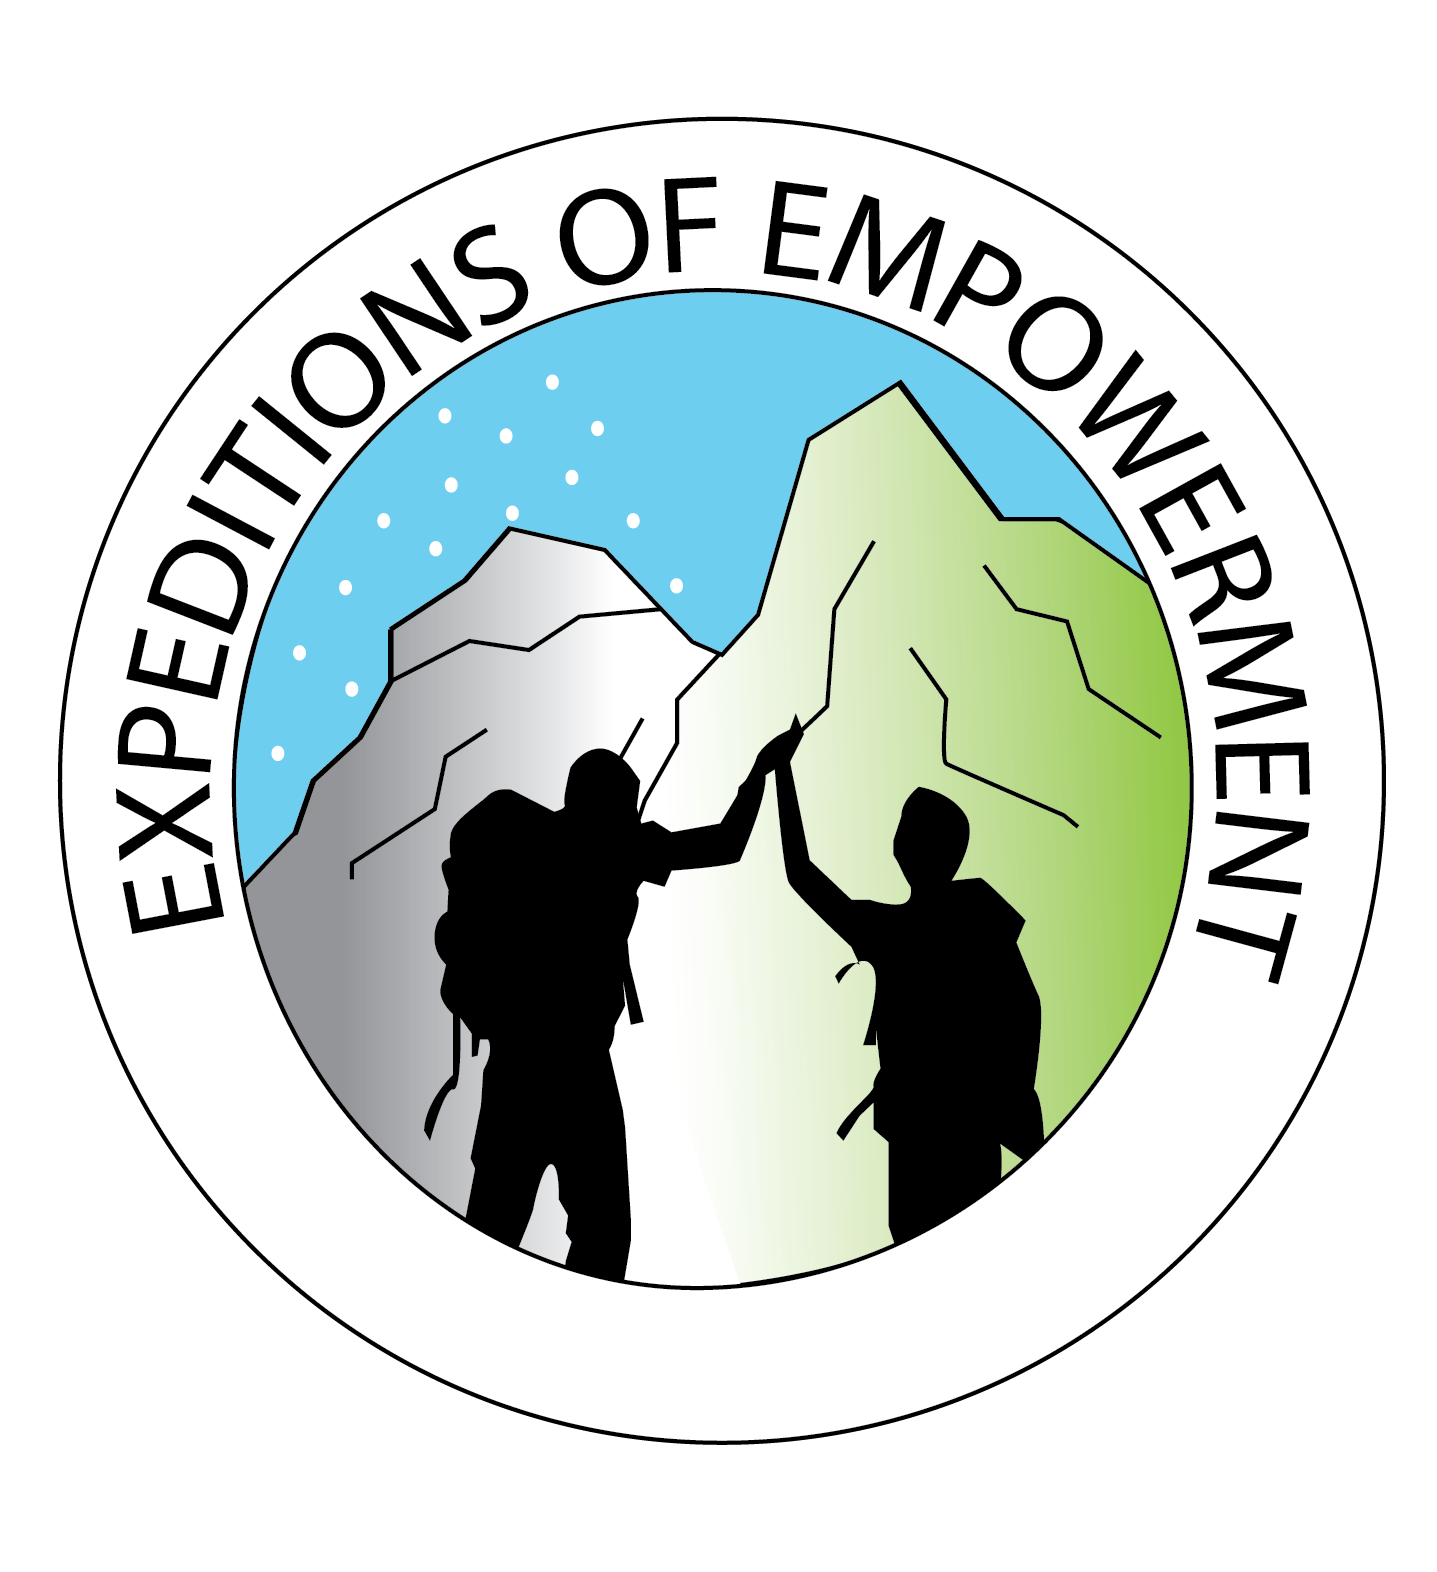 Expeditions of Empowerment